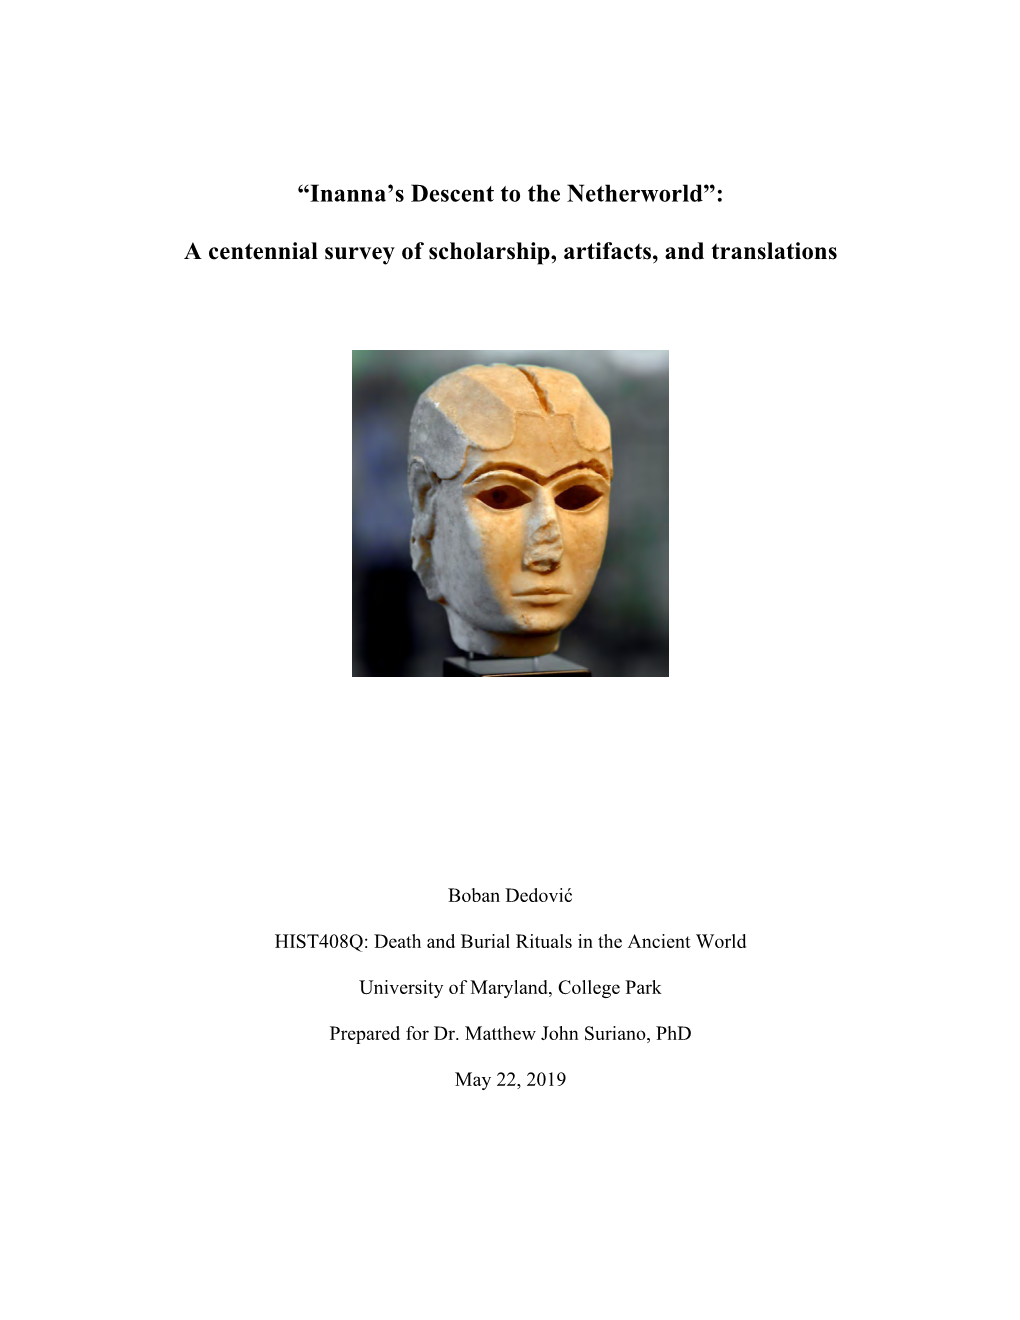 “Inanna's Descent to the Netherworld”: a Centennial Survey of Scholarship, Artifacts, and Translations